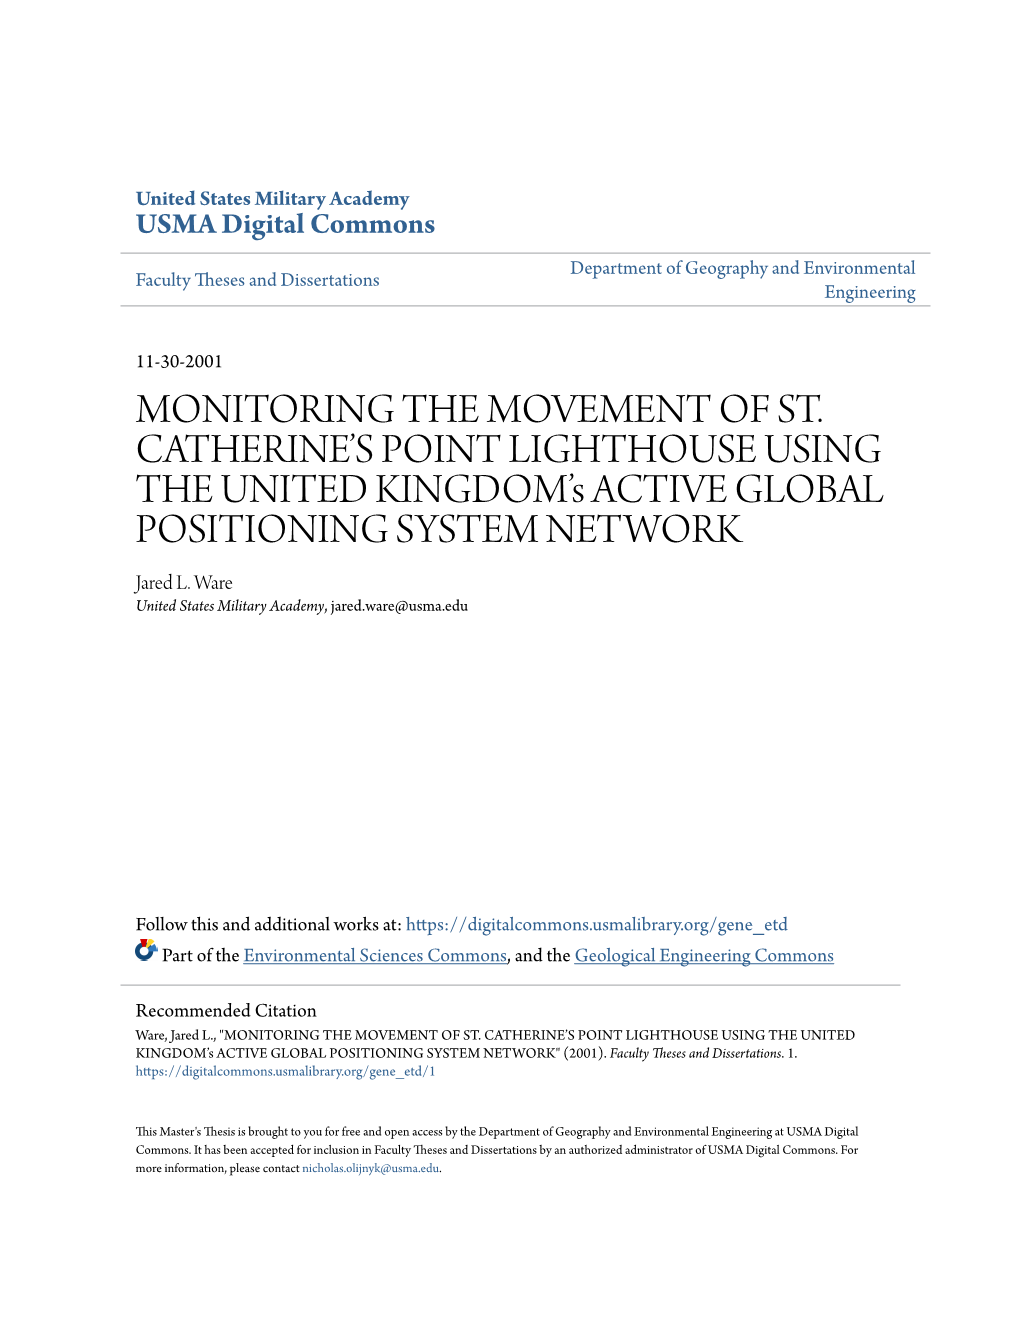 Monitoring the Movement of St. Catherine's Point